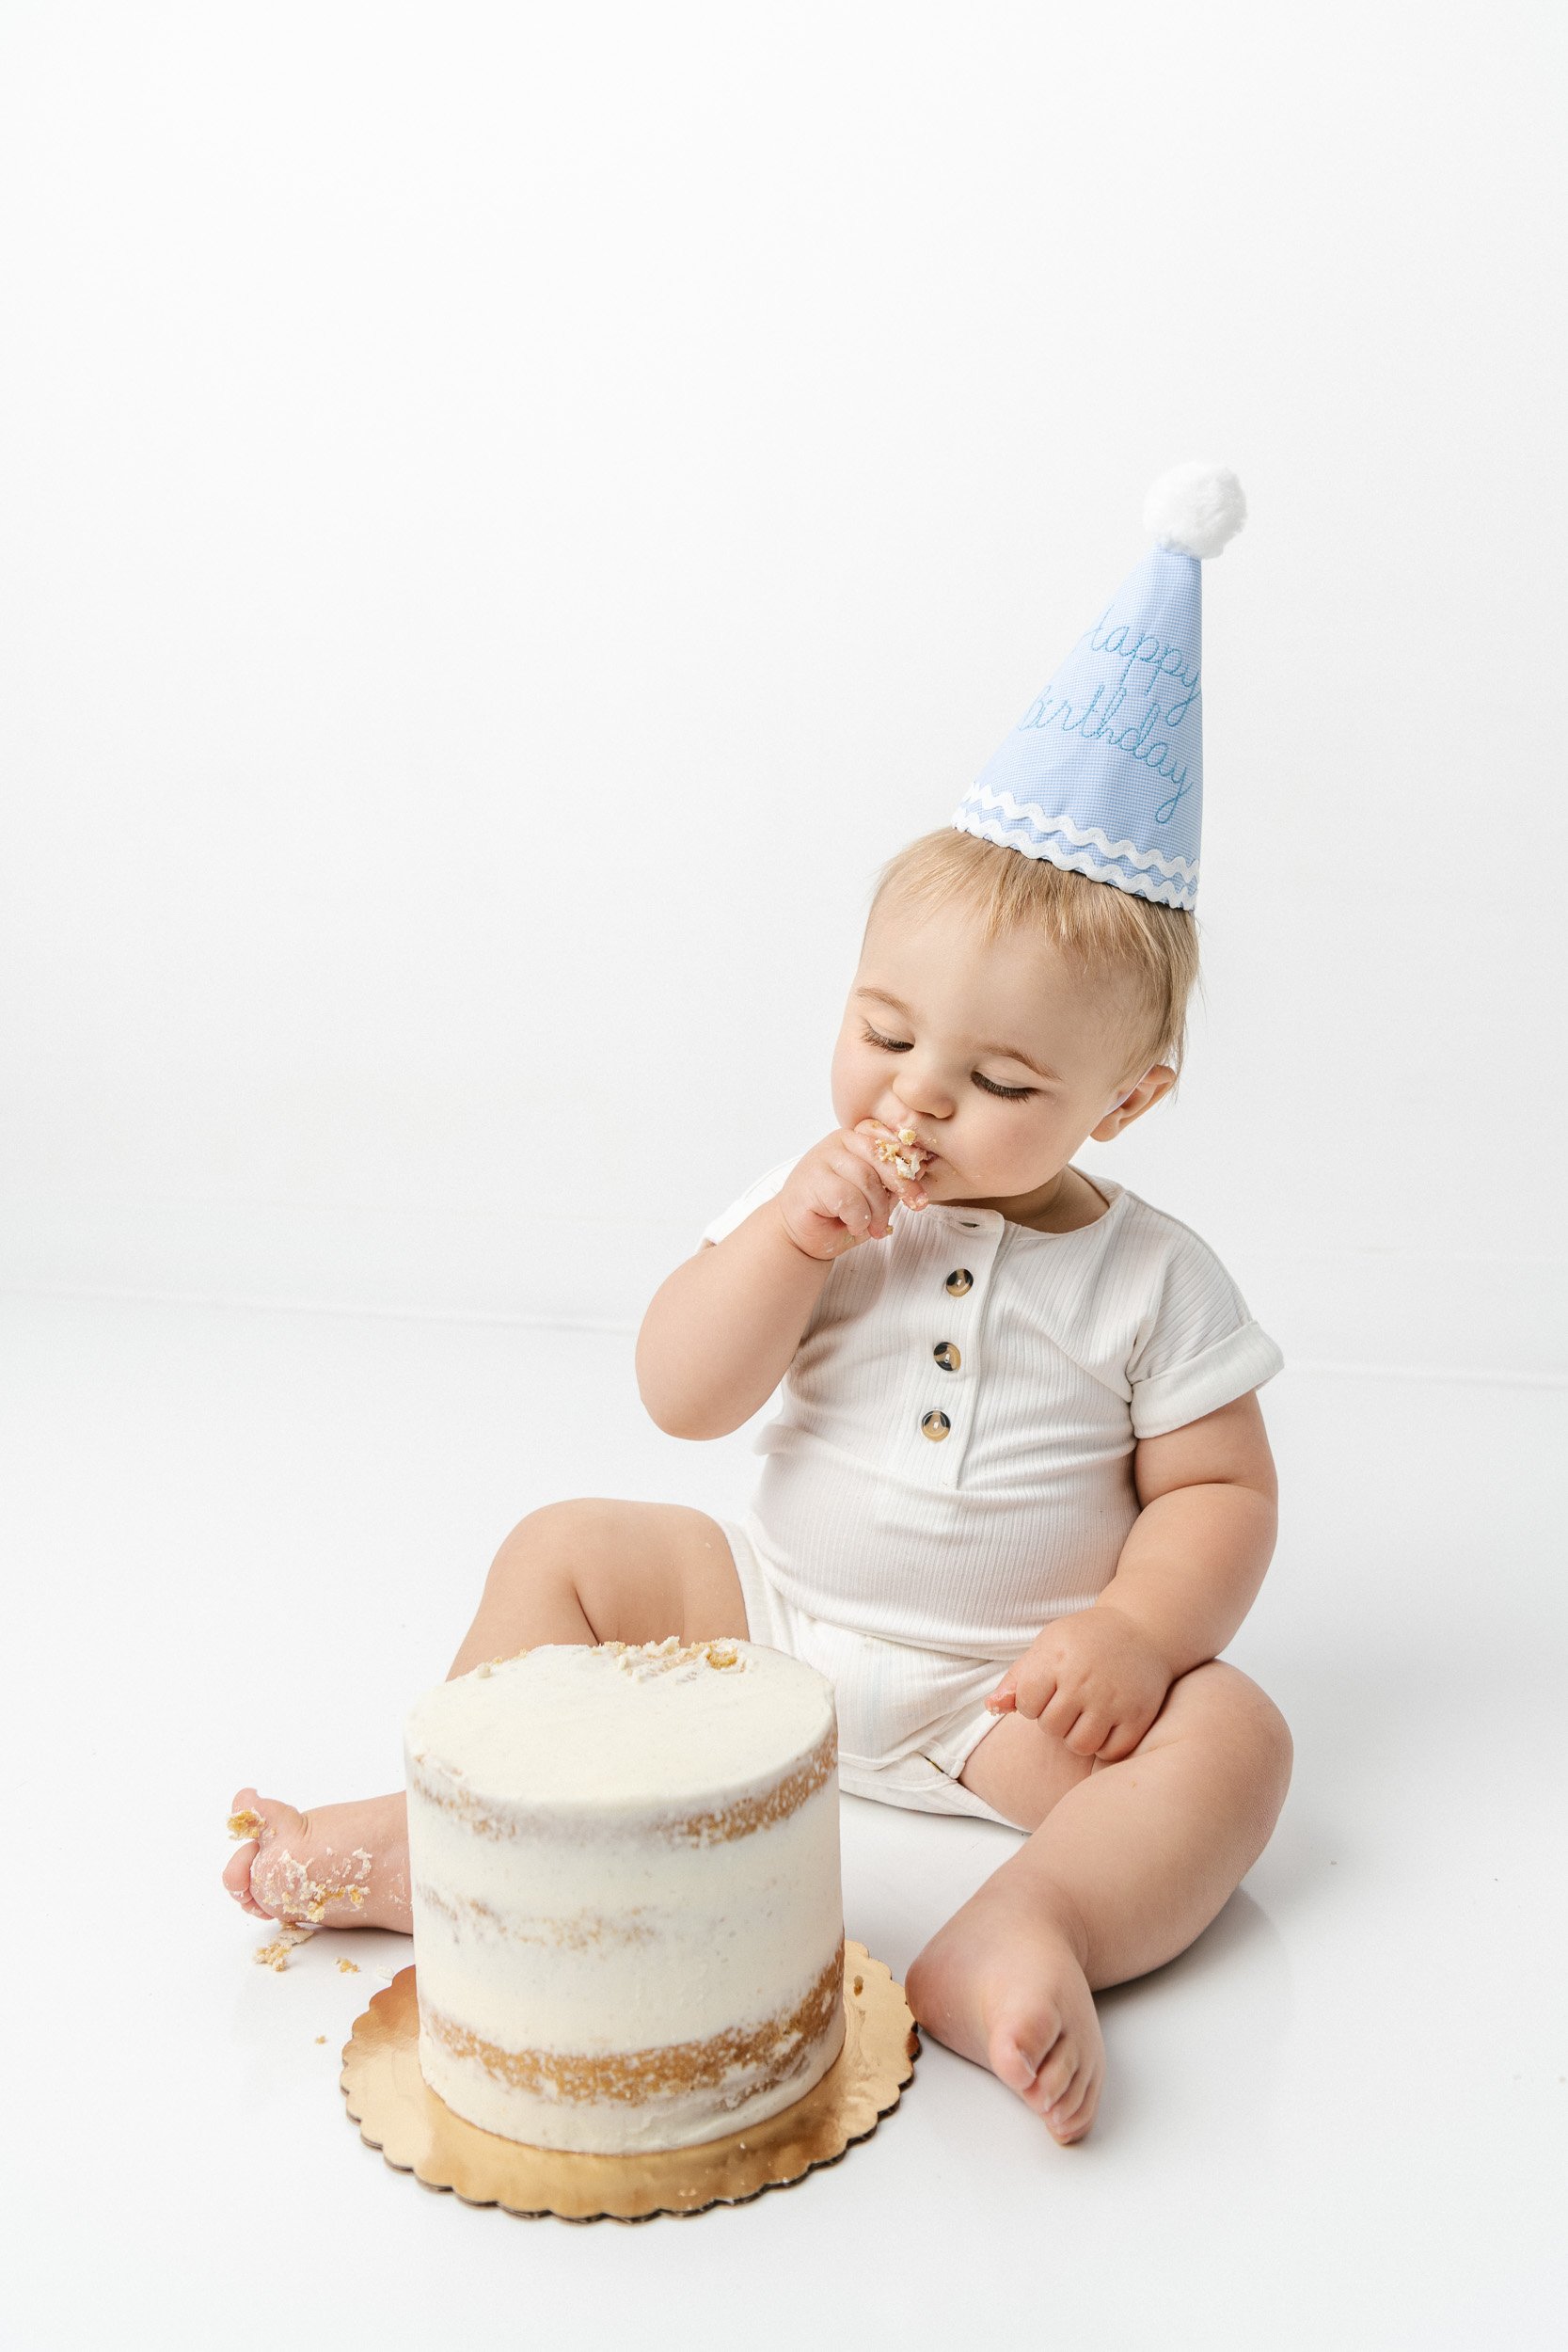  A little boy with a blue party hat in a white romper eating cake by Nicole Hawkins Photography. blue party hat #NicoleHawkinsPhotography #NicoleHawkinsBabies #BirthdayStudioPhotography #smashcake #firstbirthday #studiobabiesandchildren 